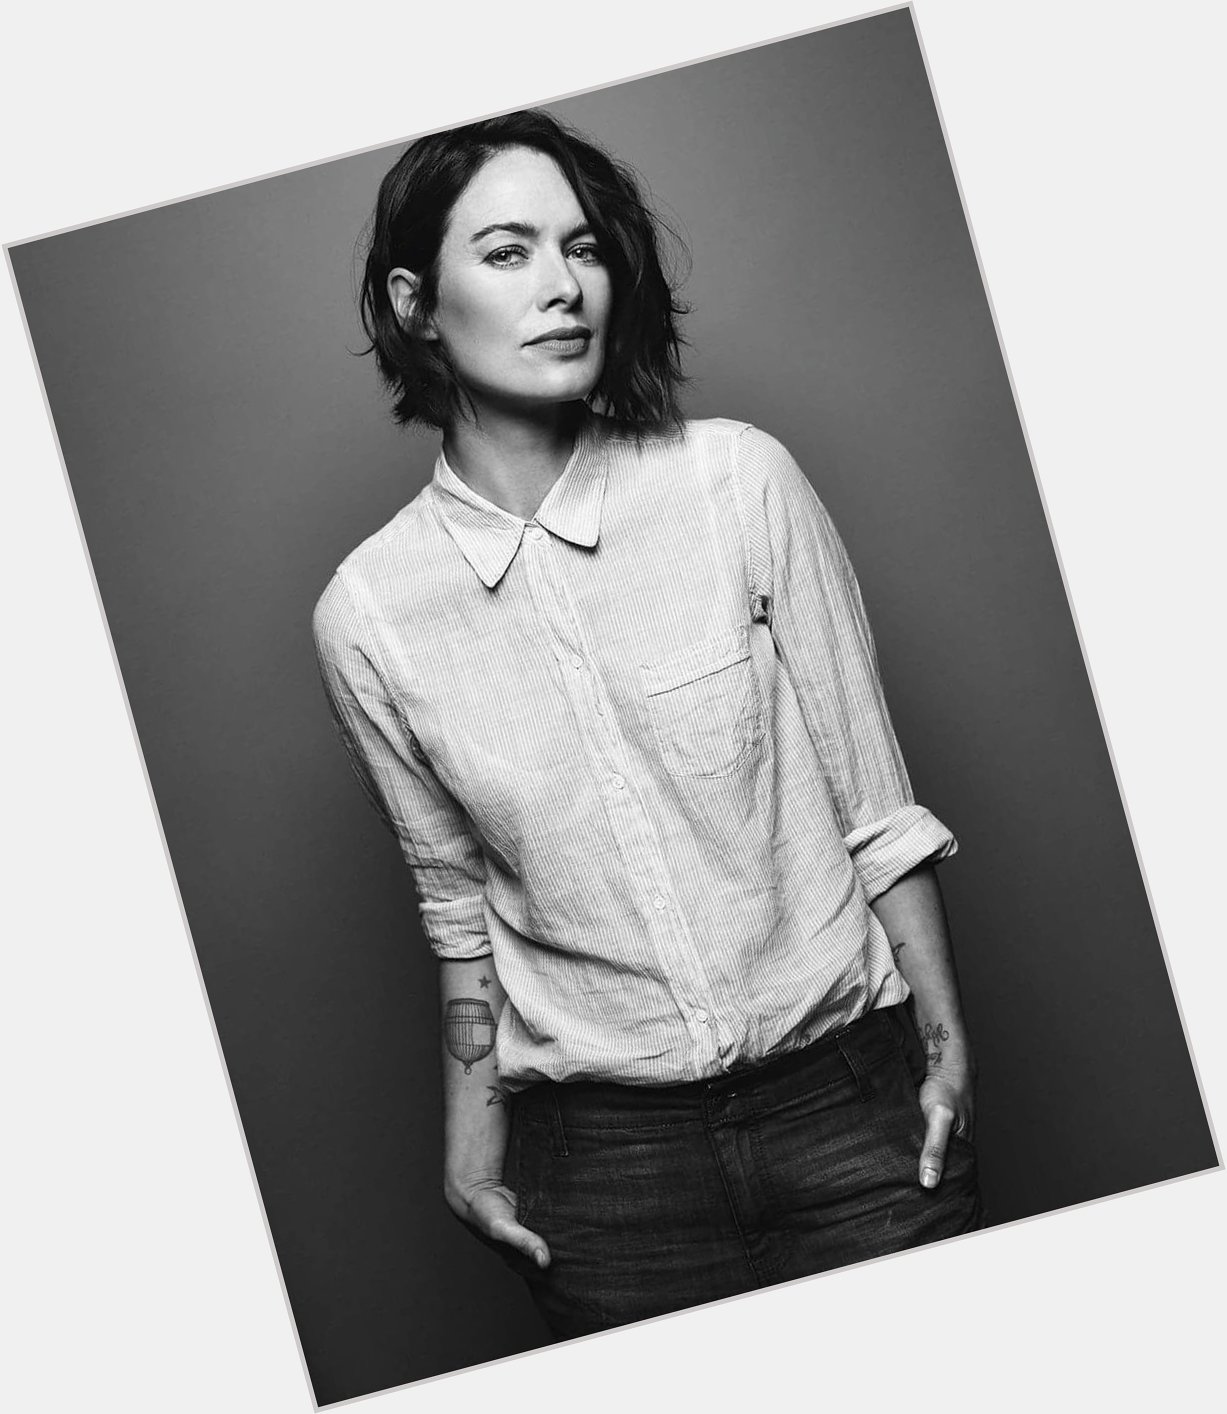 The Queen of the Seven Kingdoms, Sircy Lanister, is now 44 years old
Happy 44th birthday Lena Headey. 